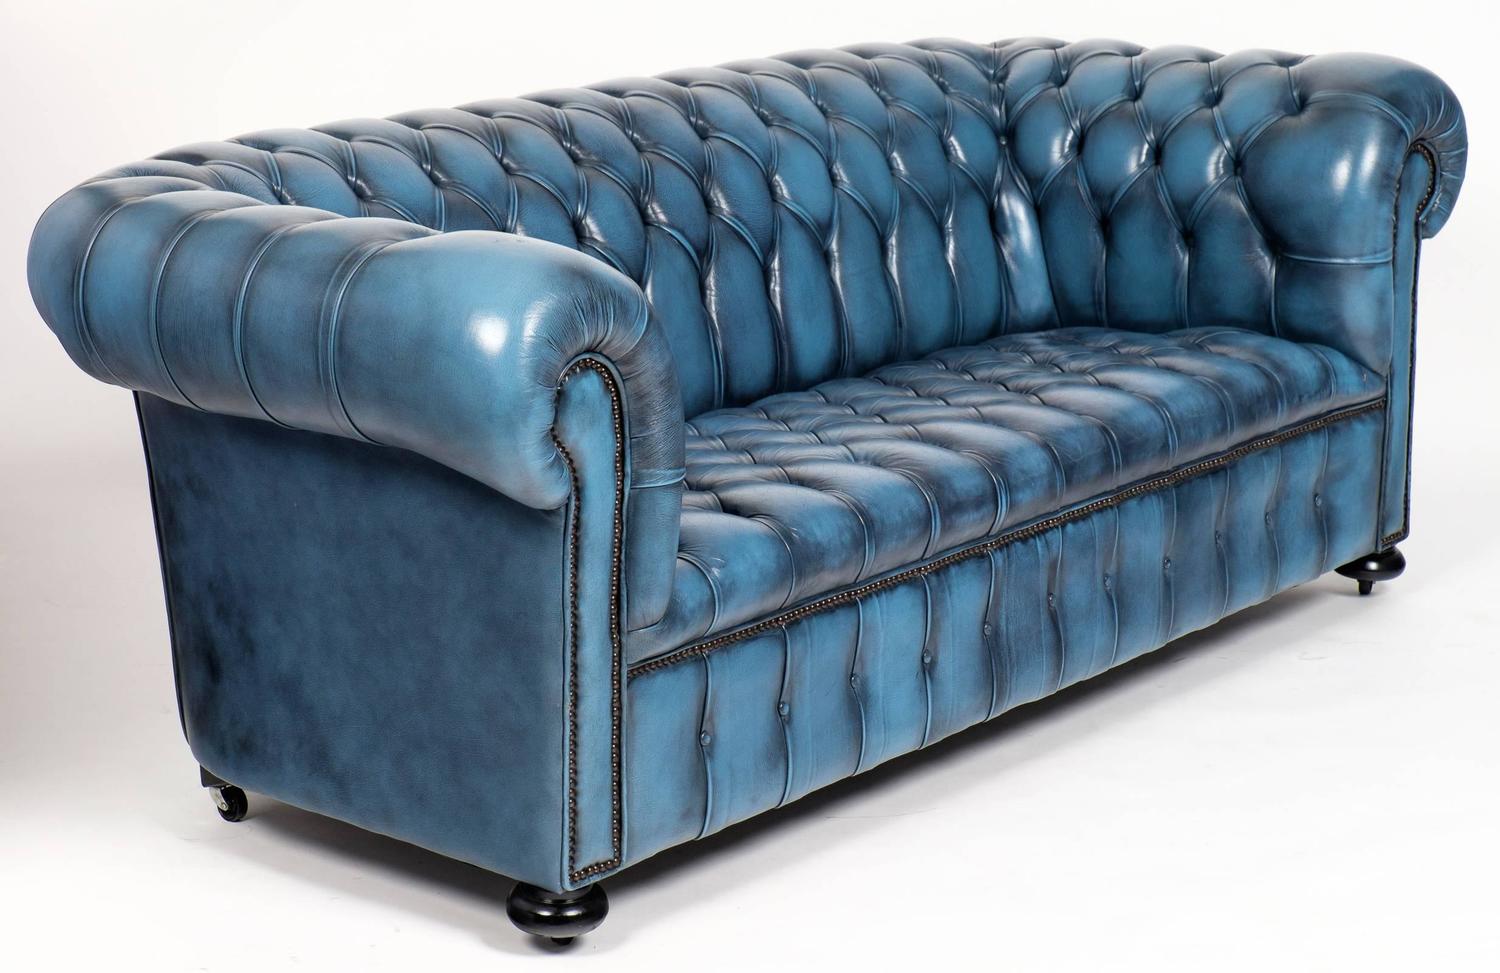 Vintage Steel Blue Leather Chesterfield Sofa at 1stdibs